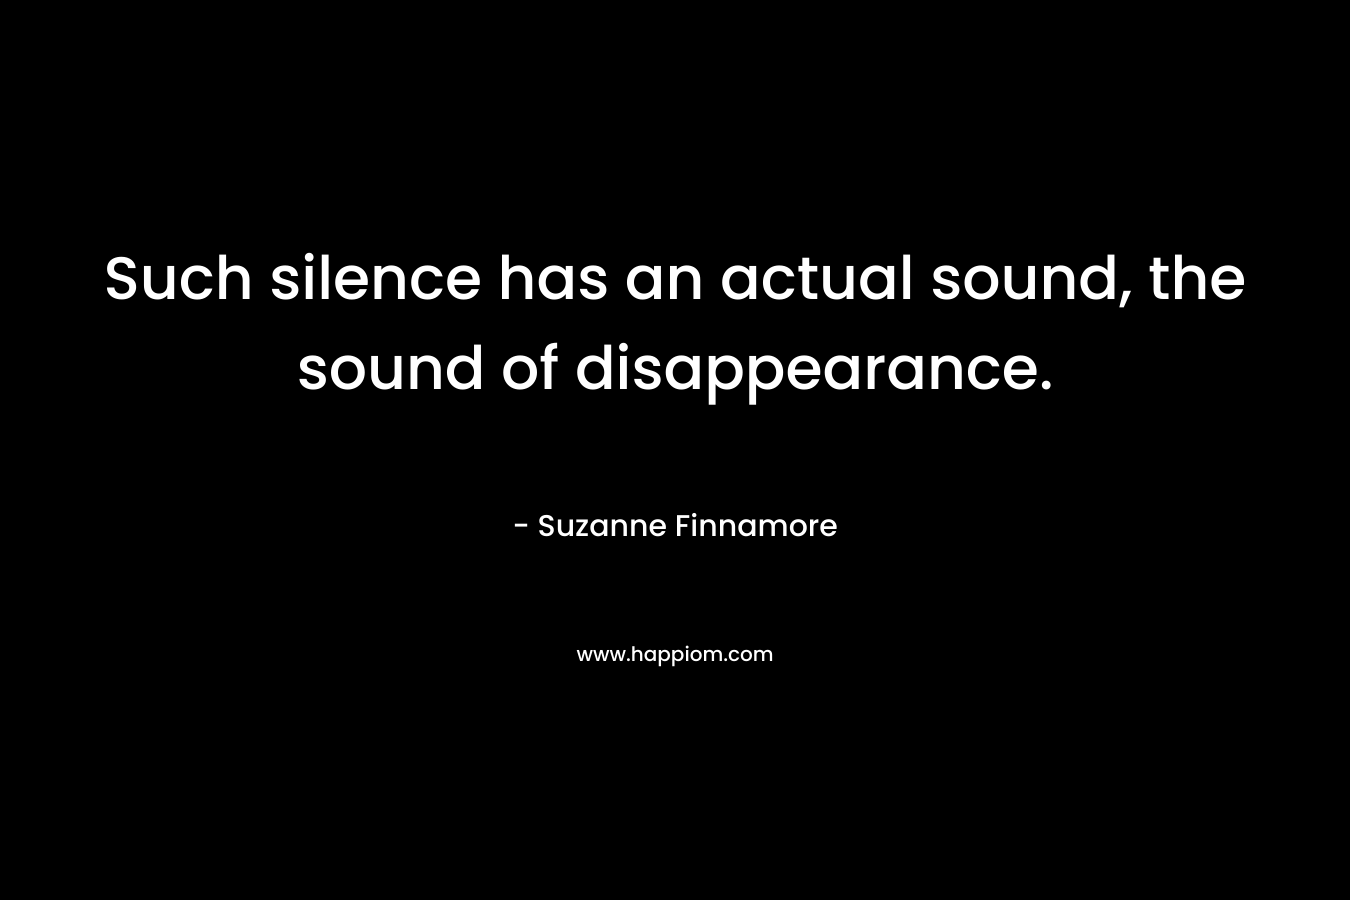 Such silence has an actual sound, the sound of disappearance.